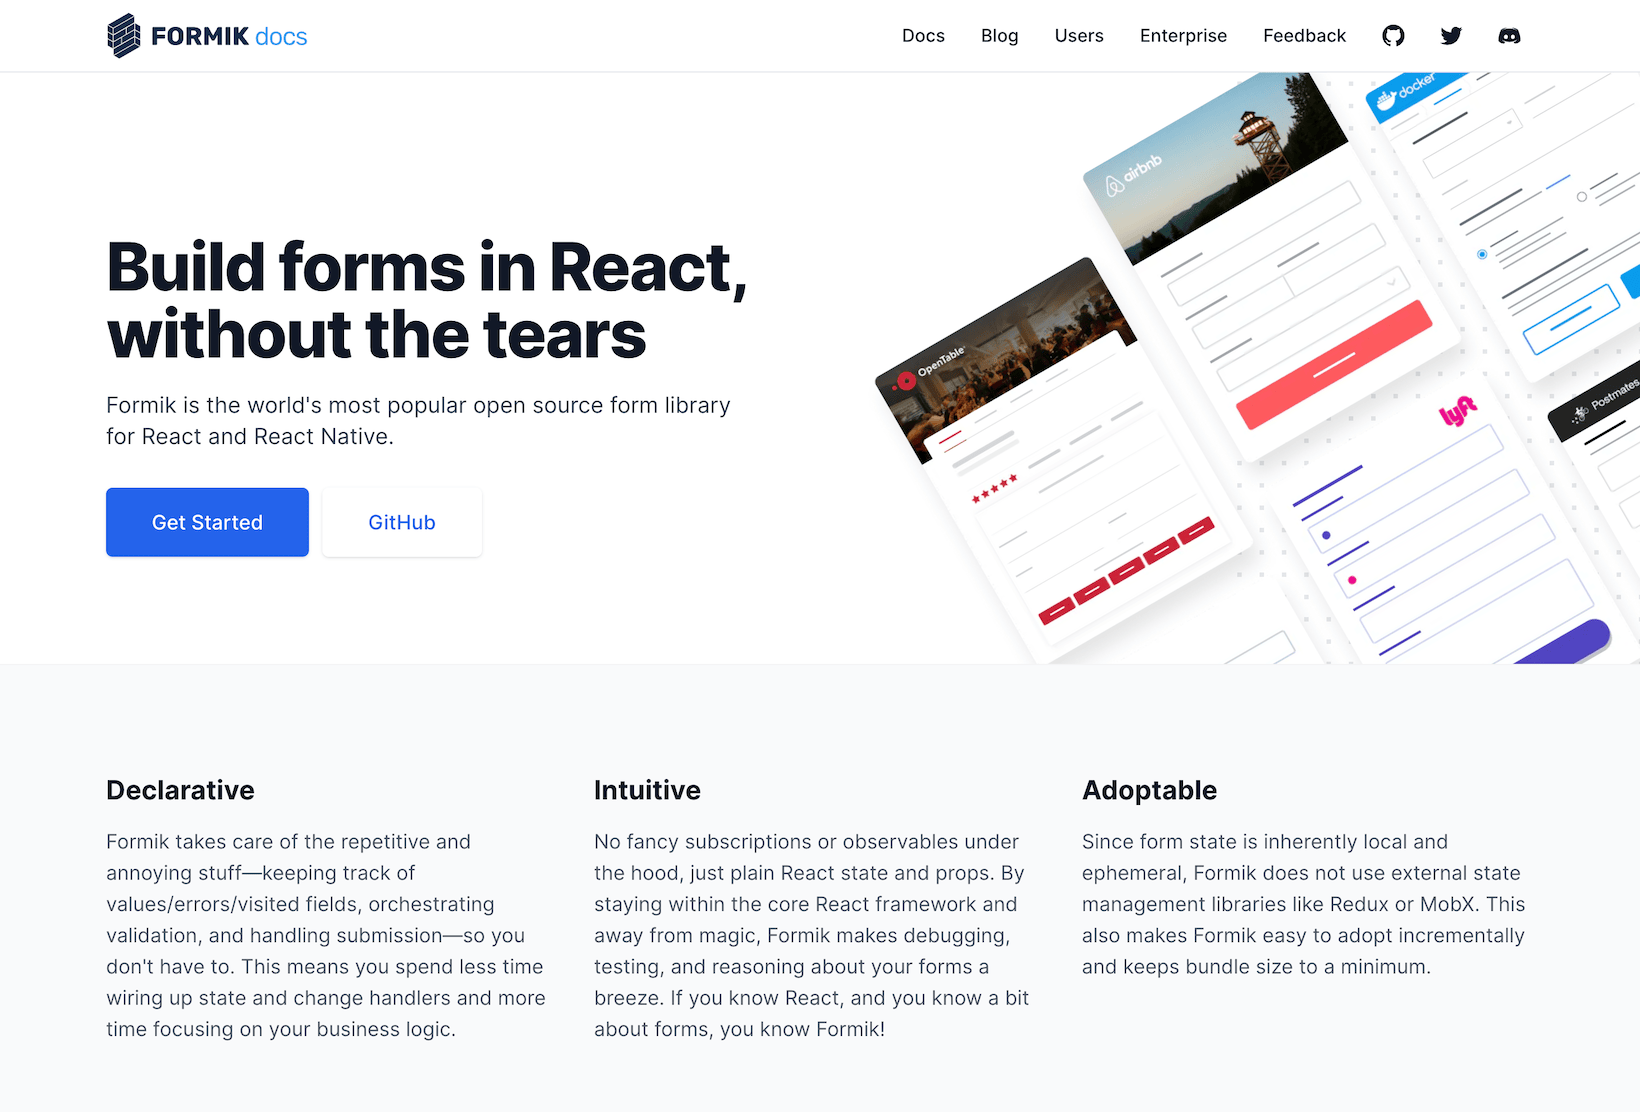 Formik homepage with the heading "Build forms in React, without the tears".